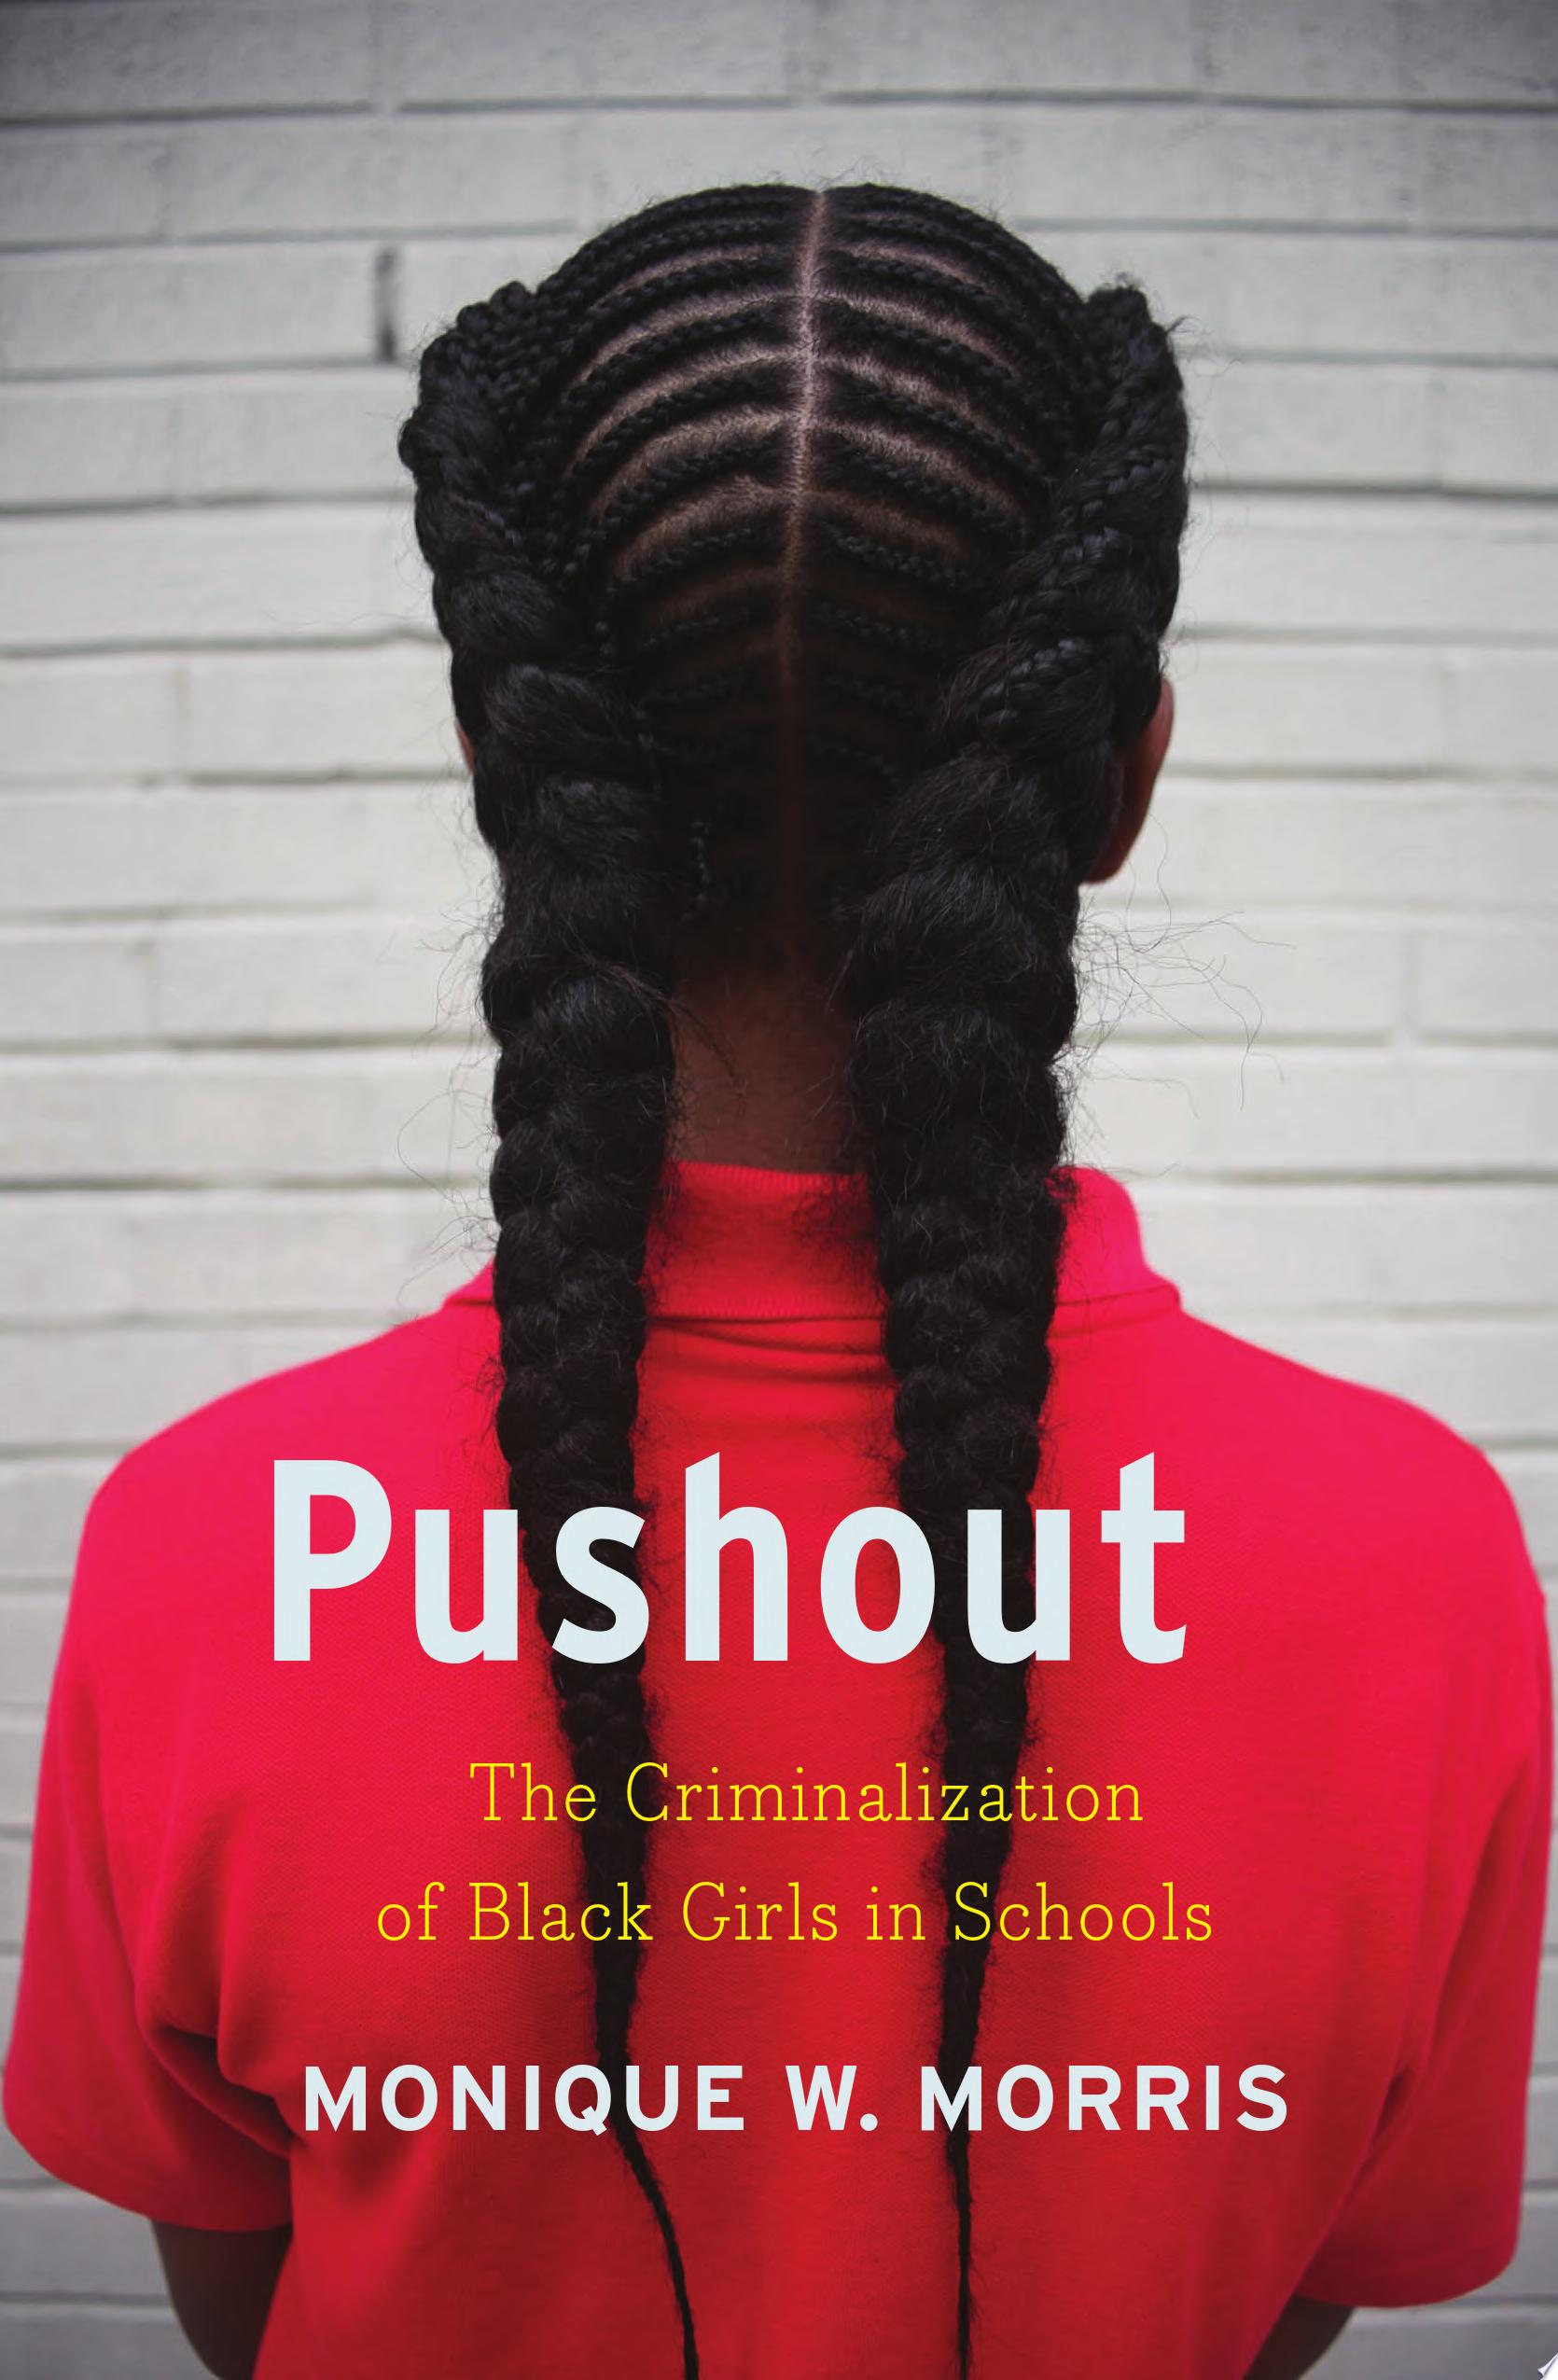 Image for "Pushout"